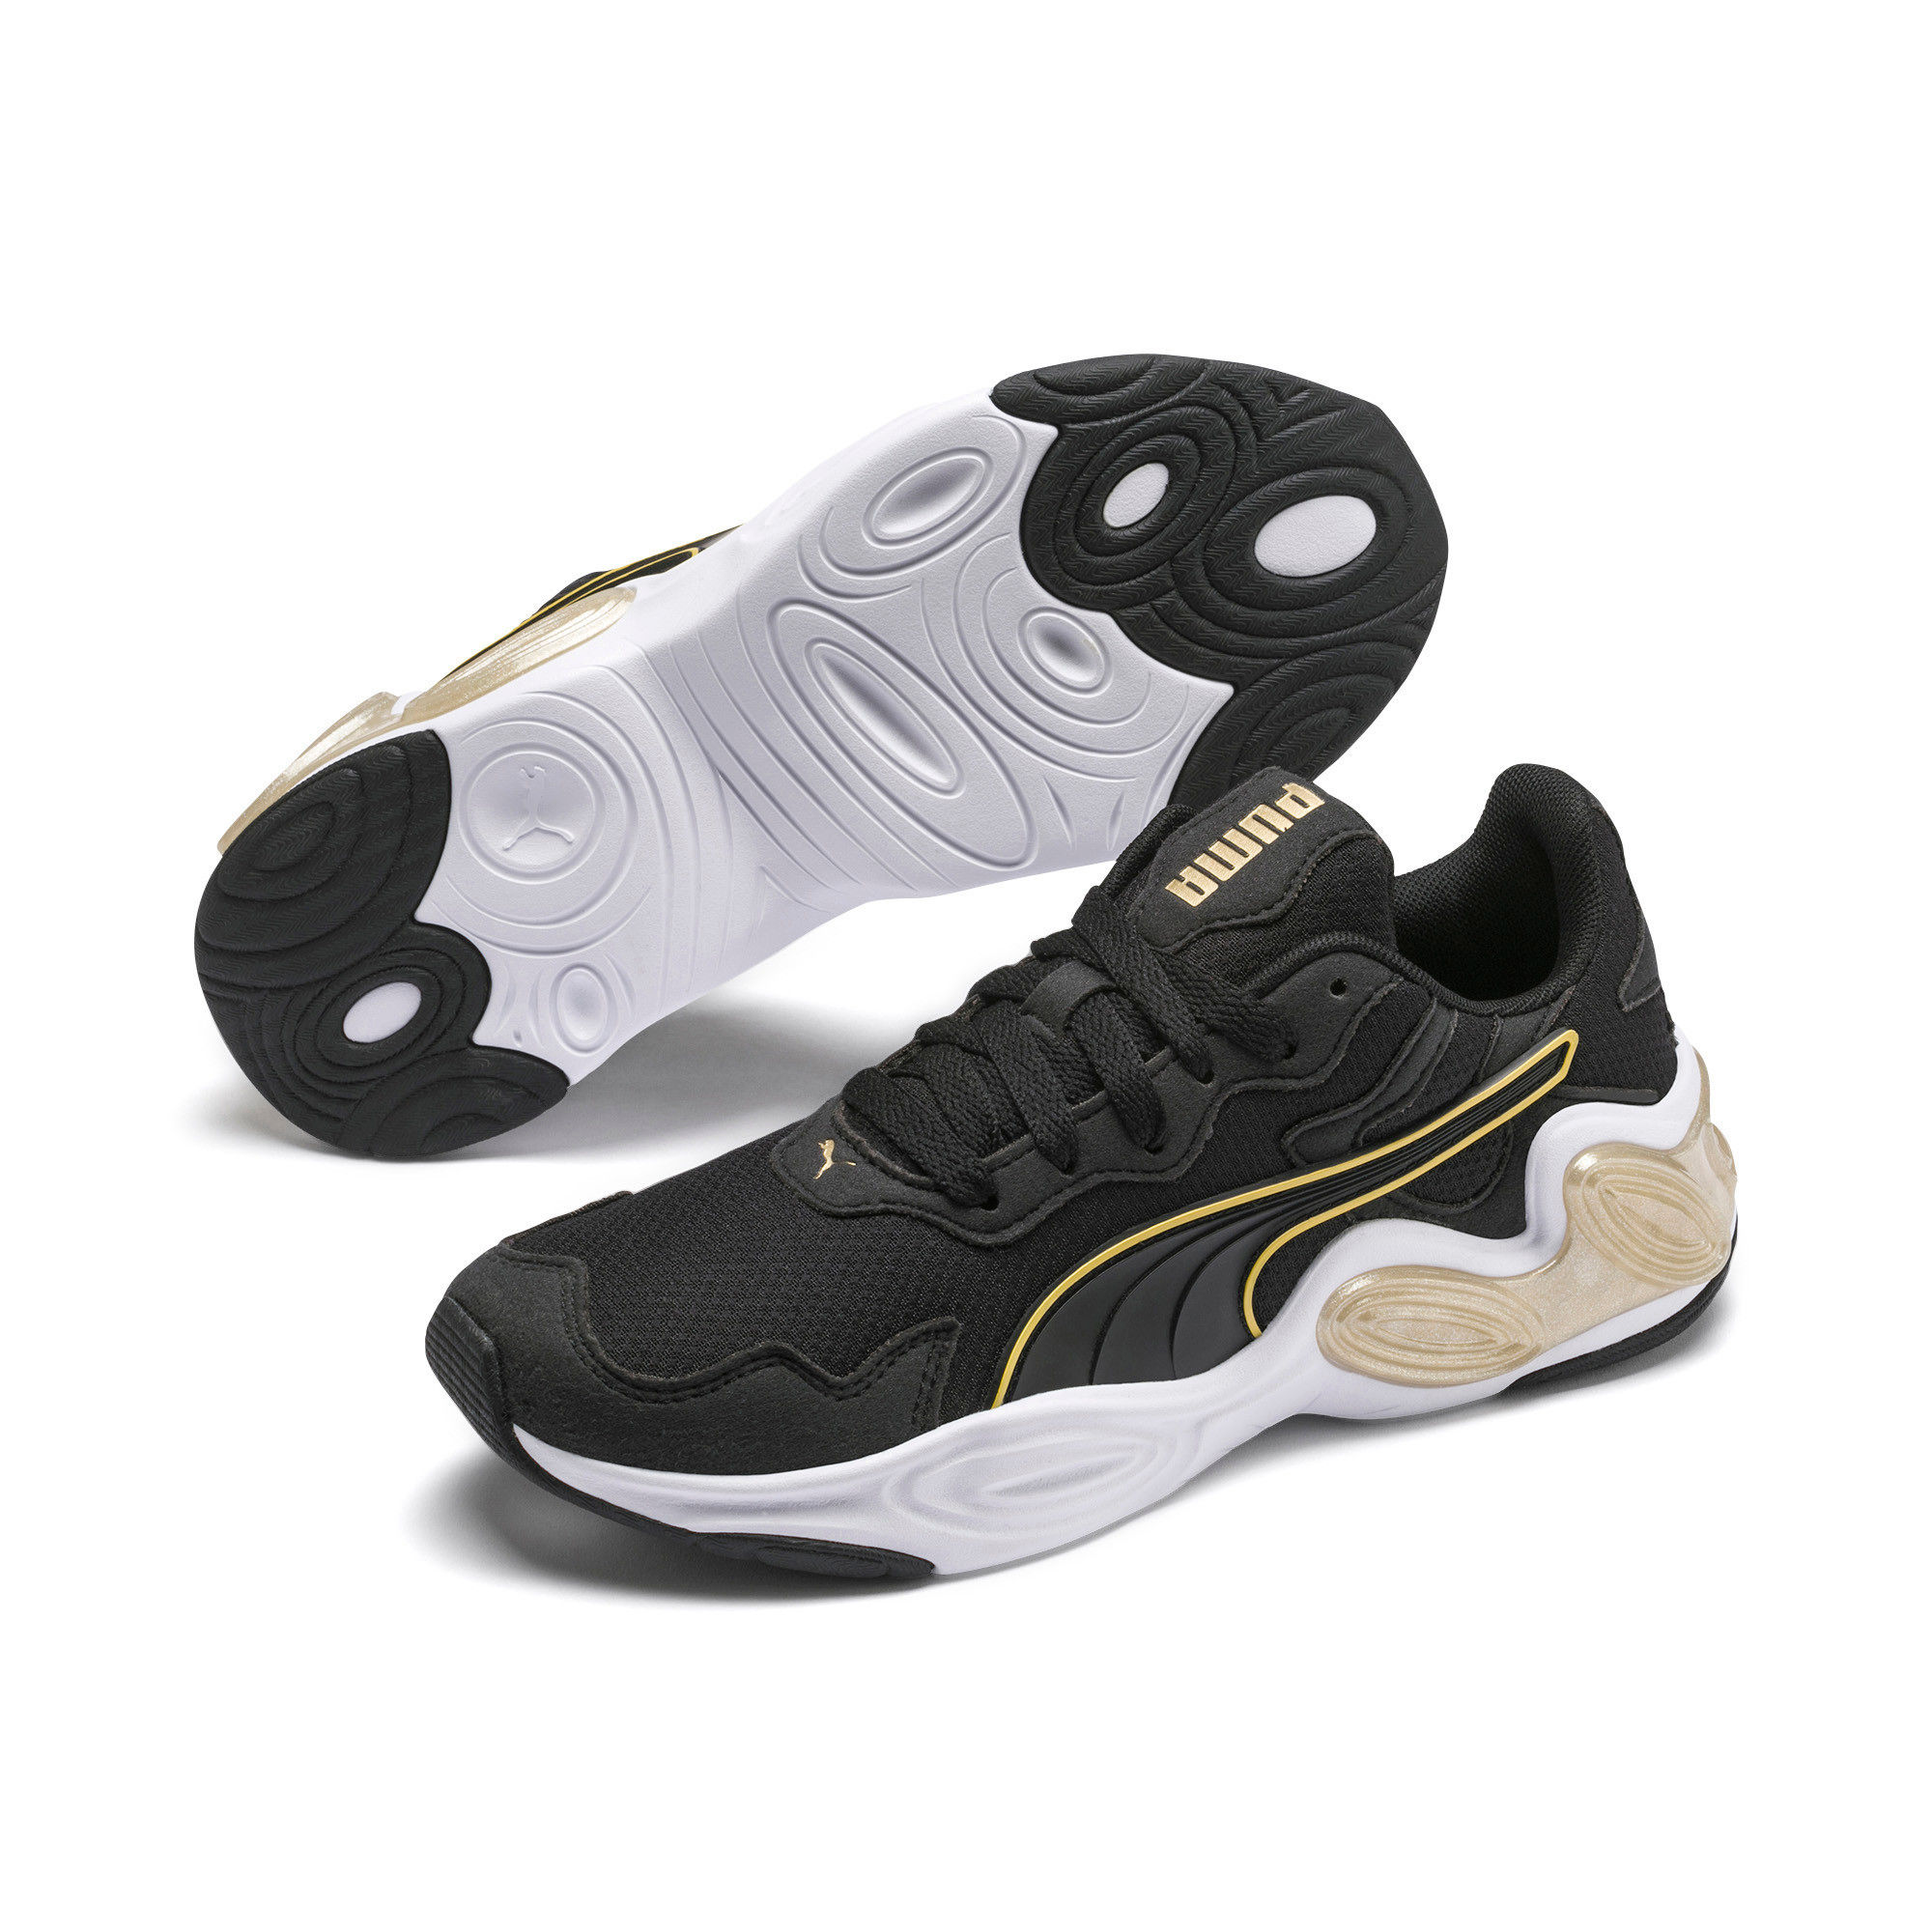 women's puma cell shoes